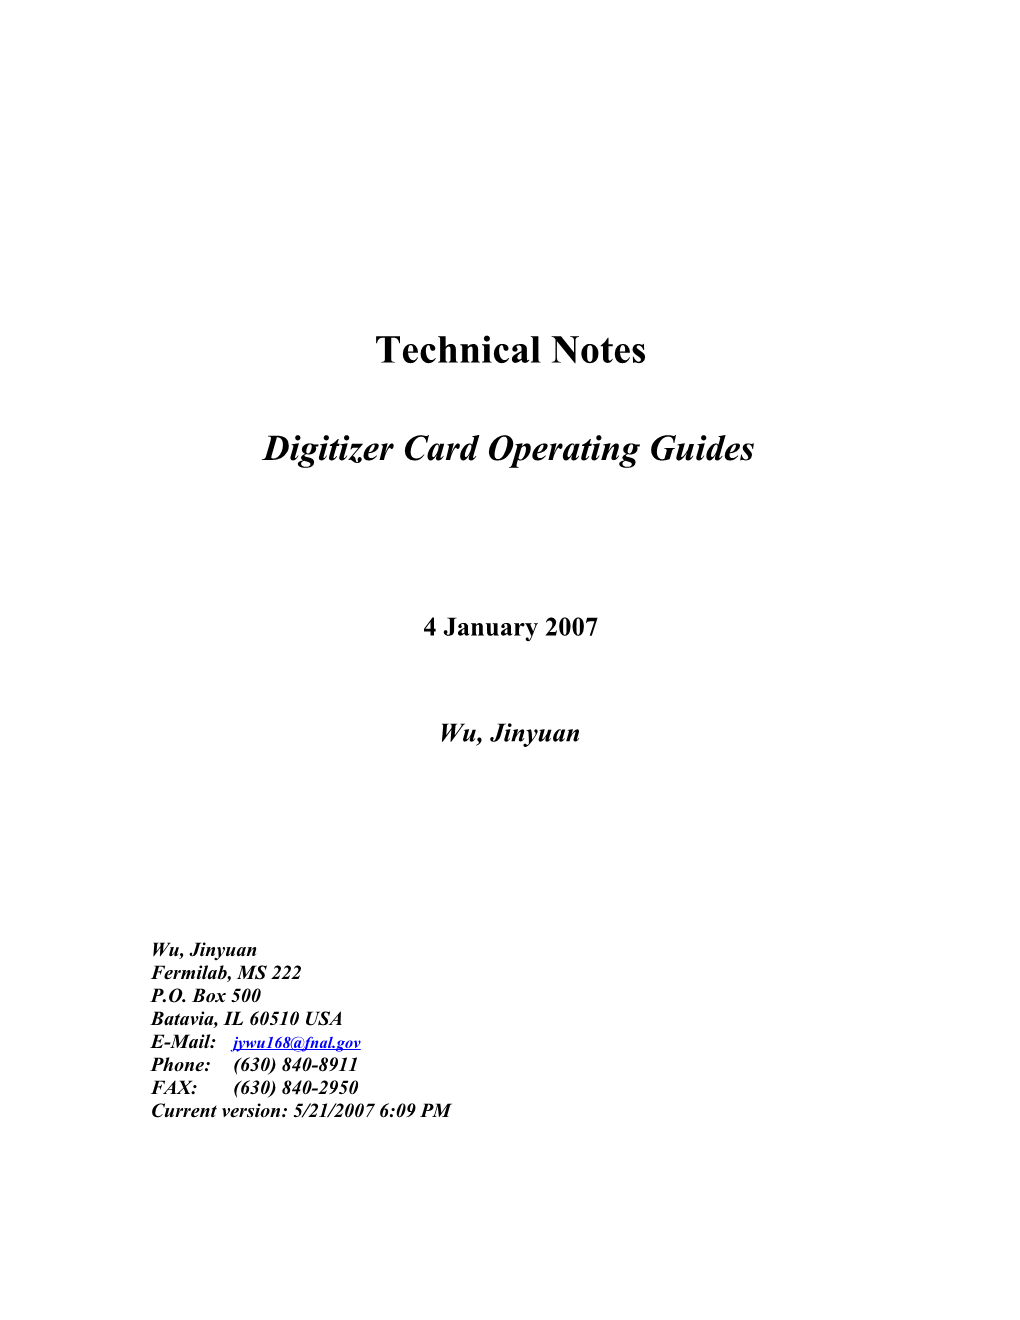 Digitizer Card Operating Guides